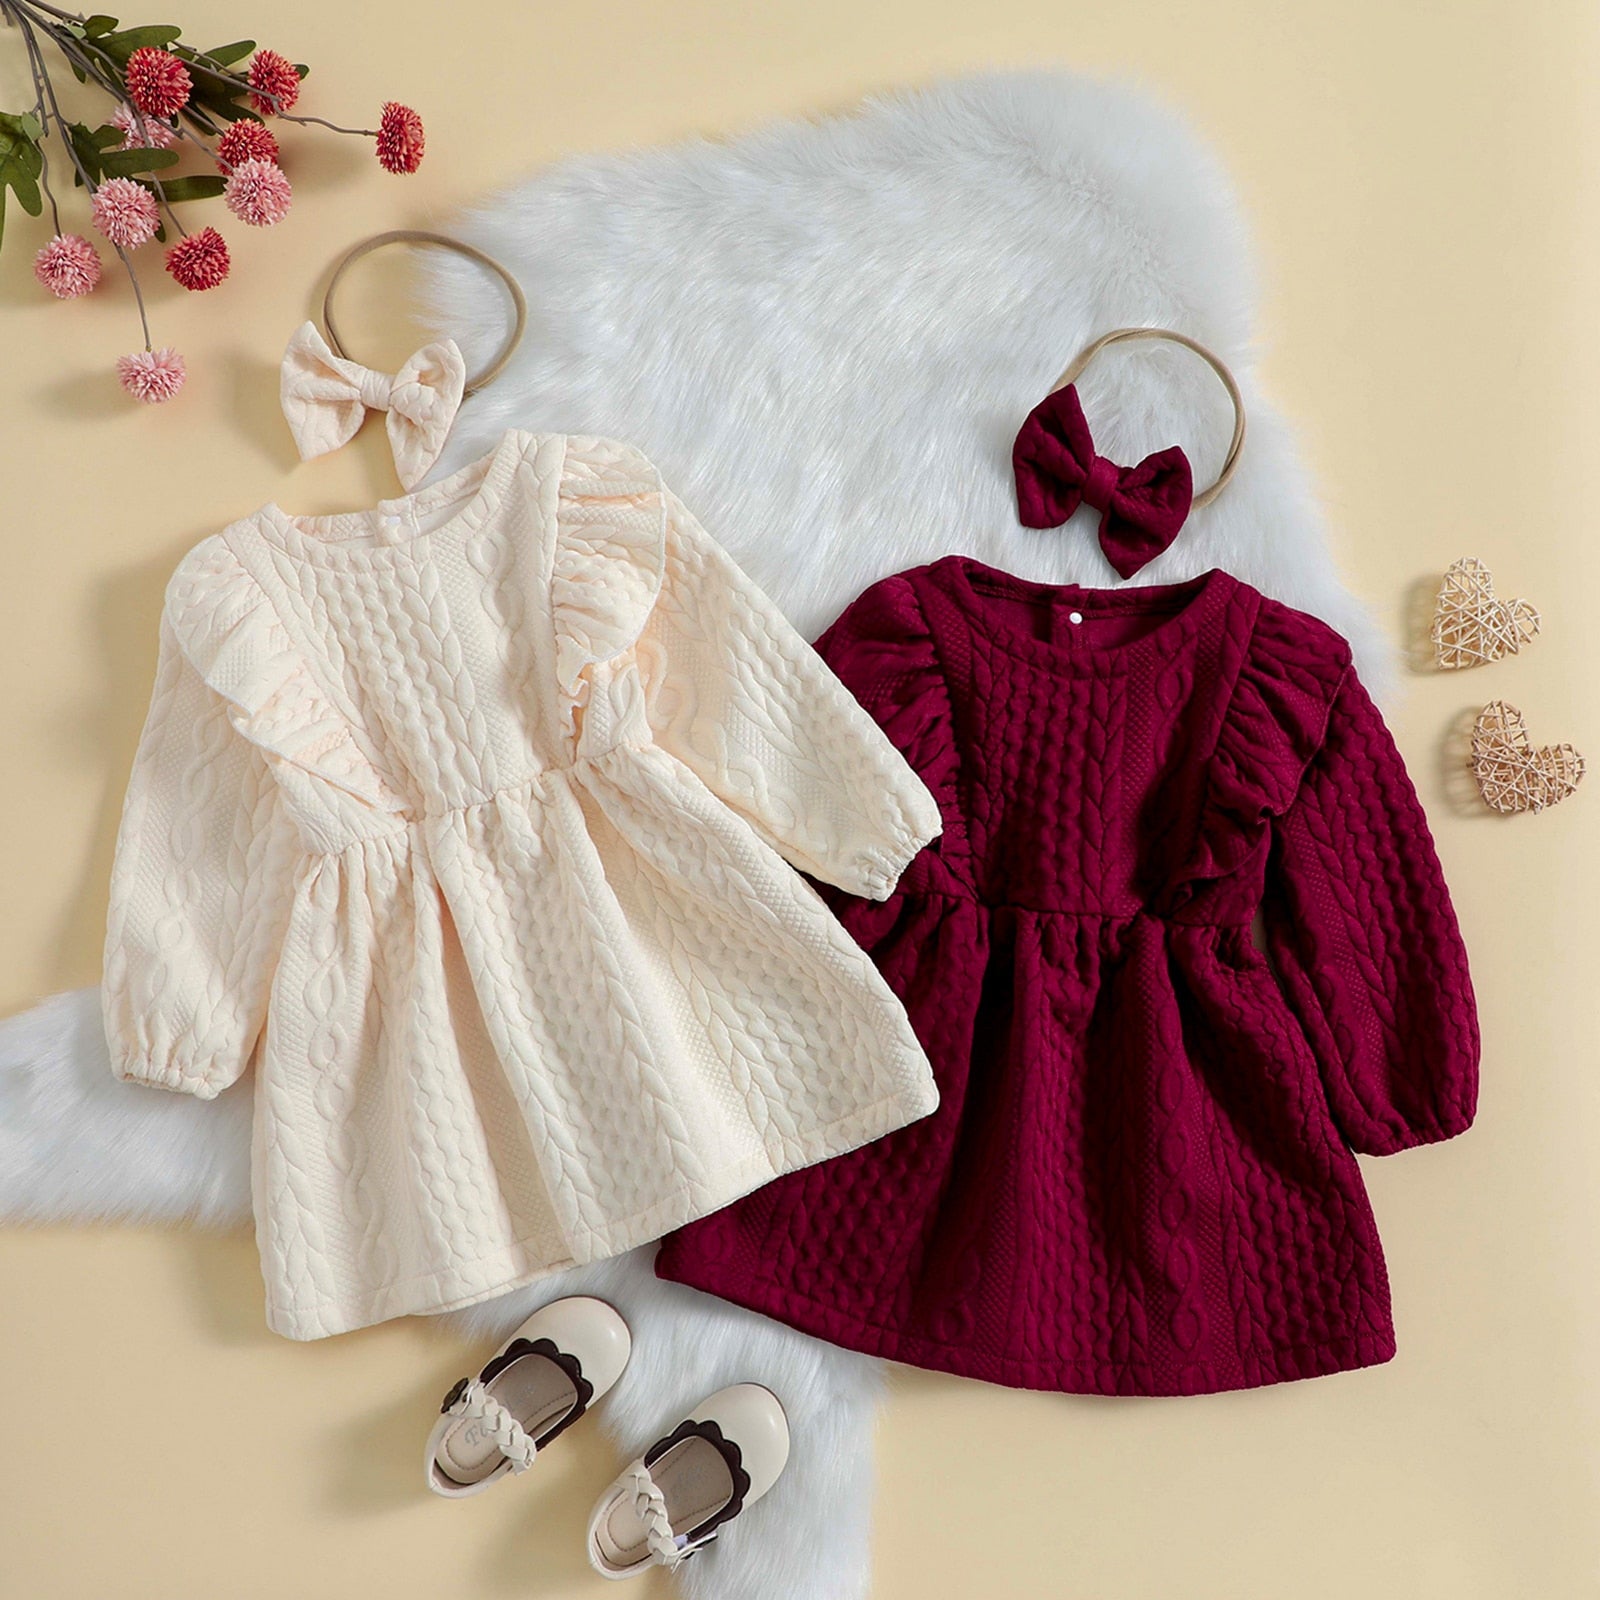 Cozy Cable-Knit Sweater Dress for Girls